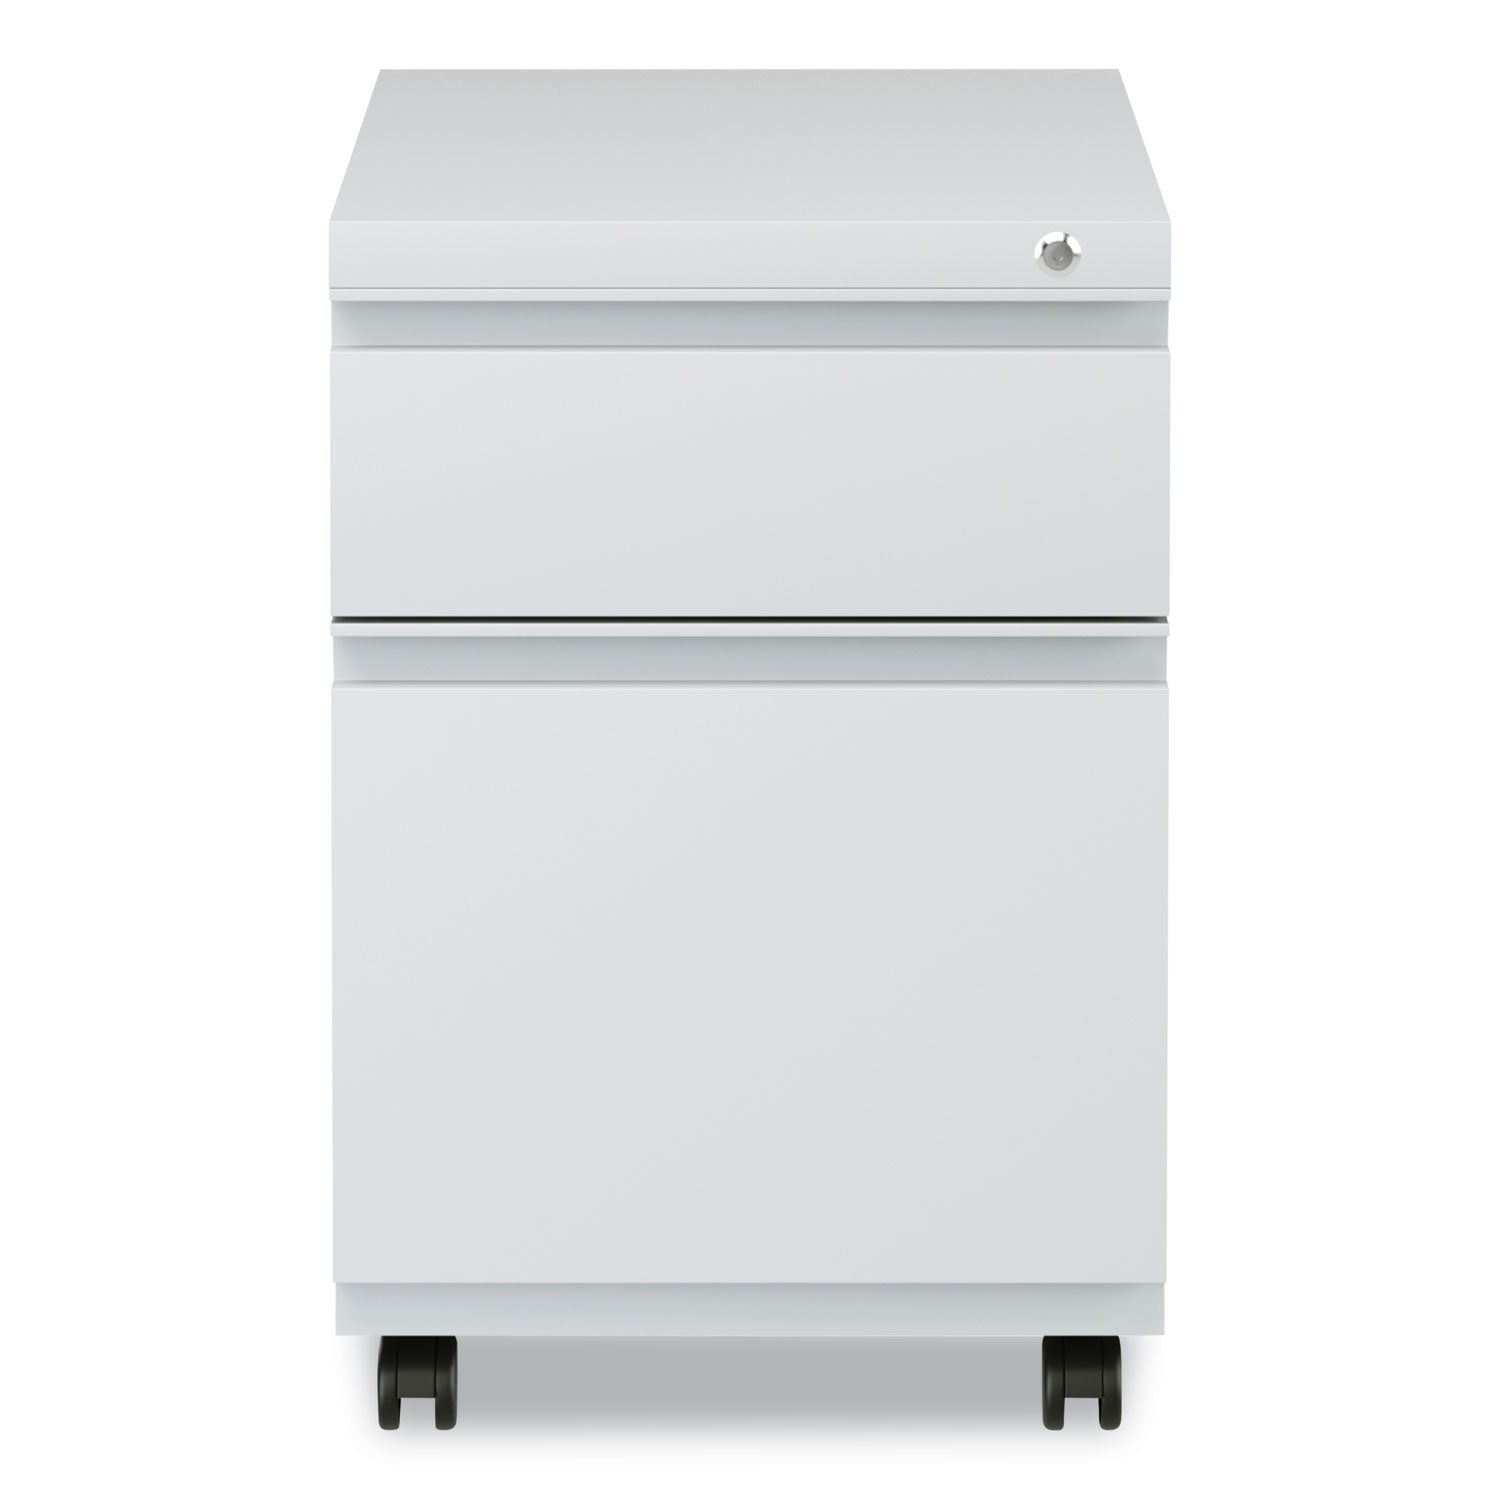 file-pedestal-with-full-length-pull-left-or-right-2-drawers-box-file-legal-letter-light-gray-1496-x-1929-x-2165_alepbbflg - 5